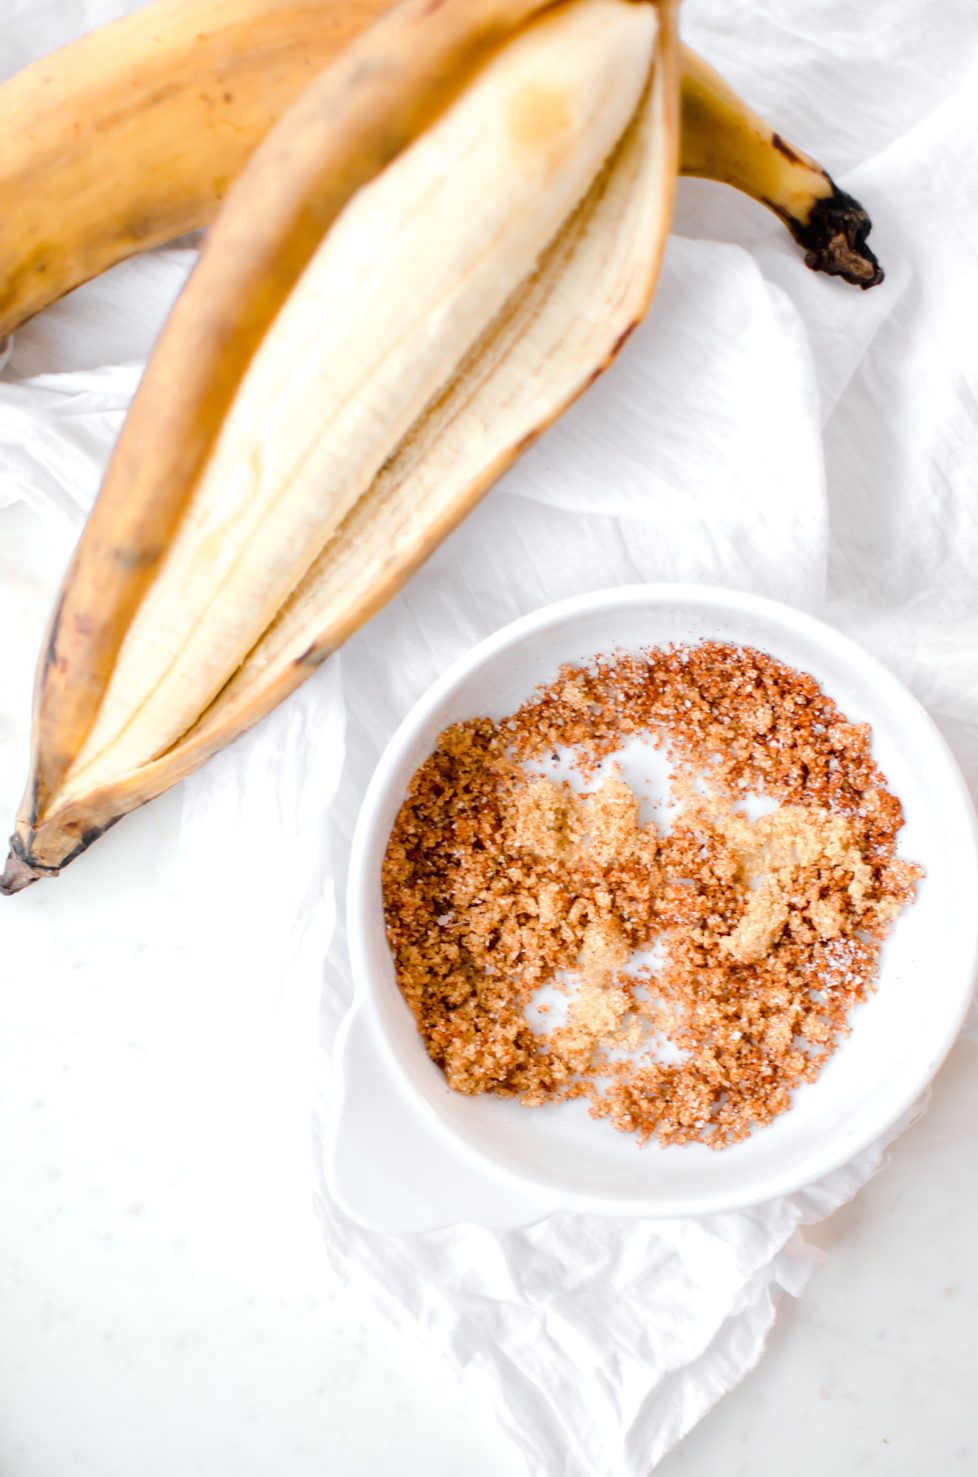 A plantain with cinnamon topping.